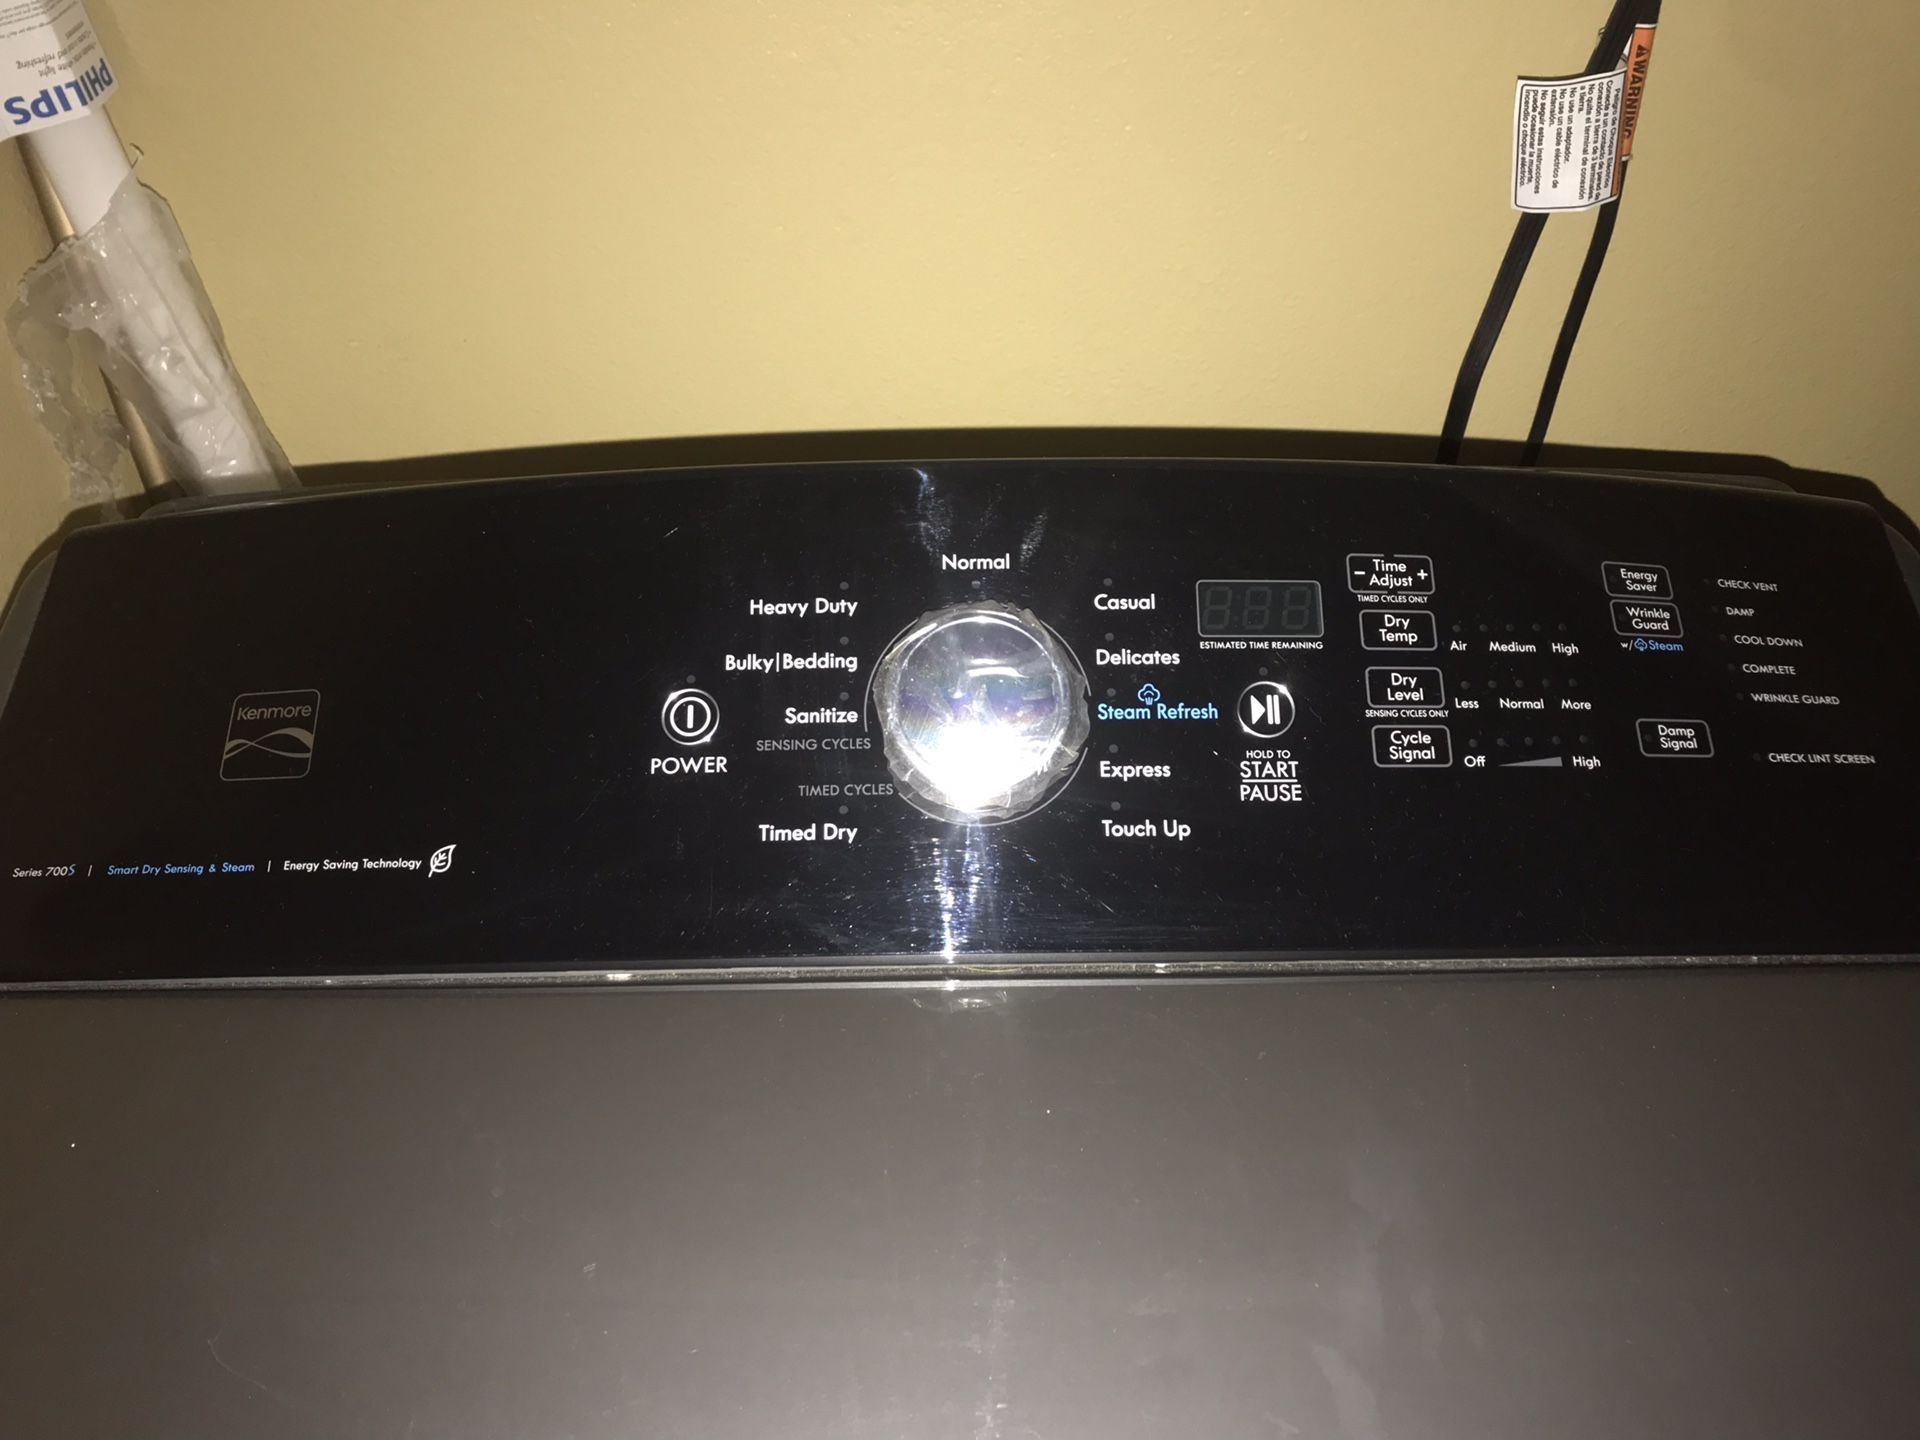 Kenmore Top Loader Washer & Dryer, Metallic Gray. Great condition! Only 3 yrs old maintained by Sears service.